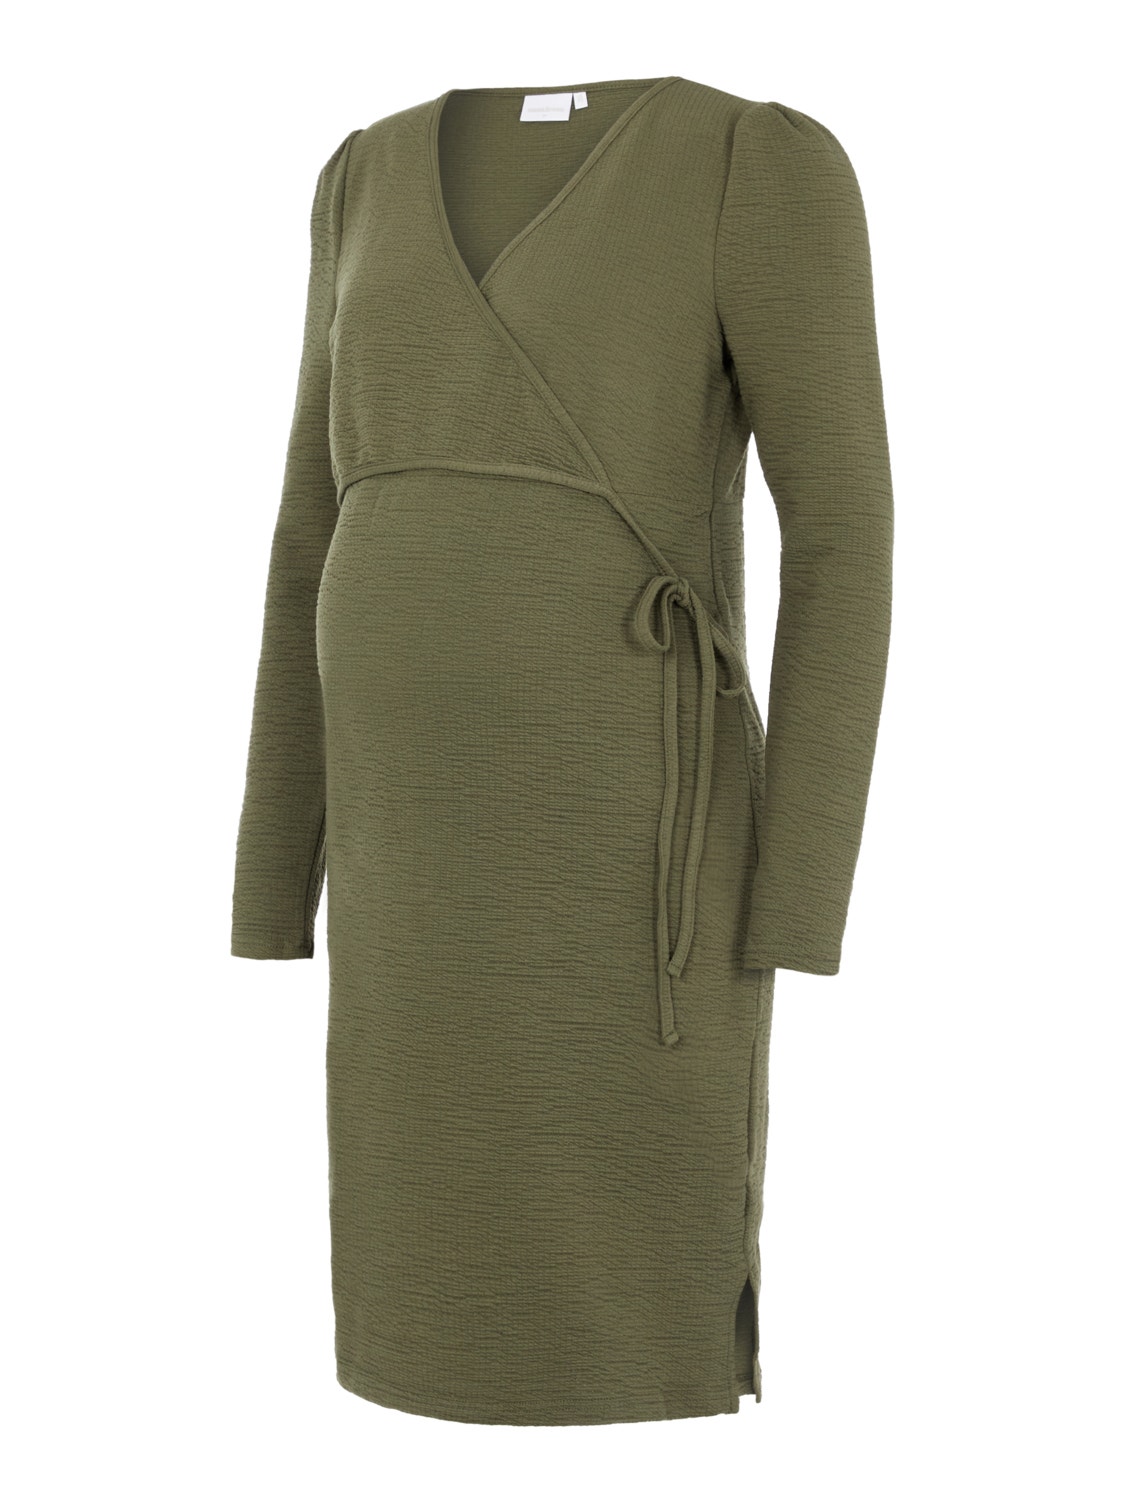 MAMA.LICIOUS Robes Regular Fit Col en V -Dusty Olive - 20012670